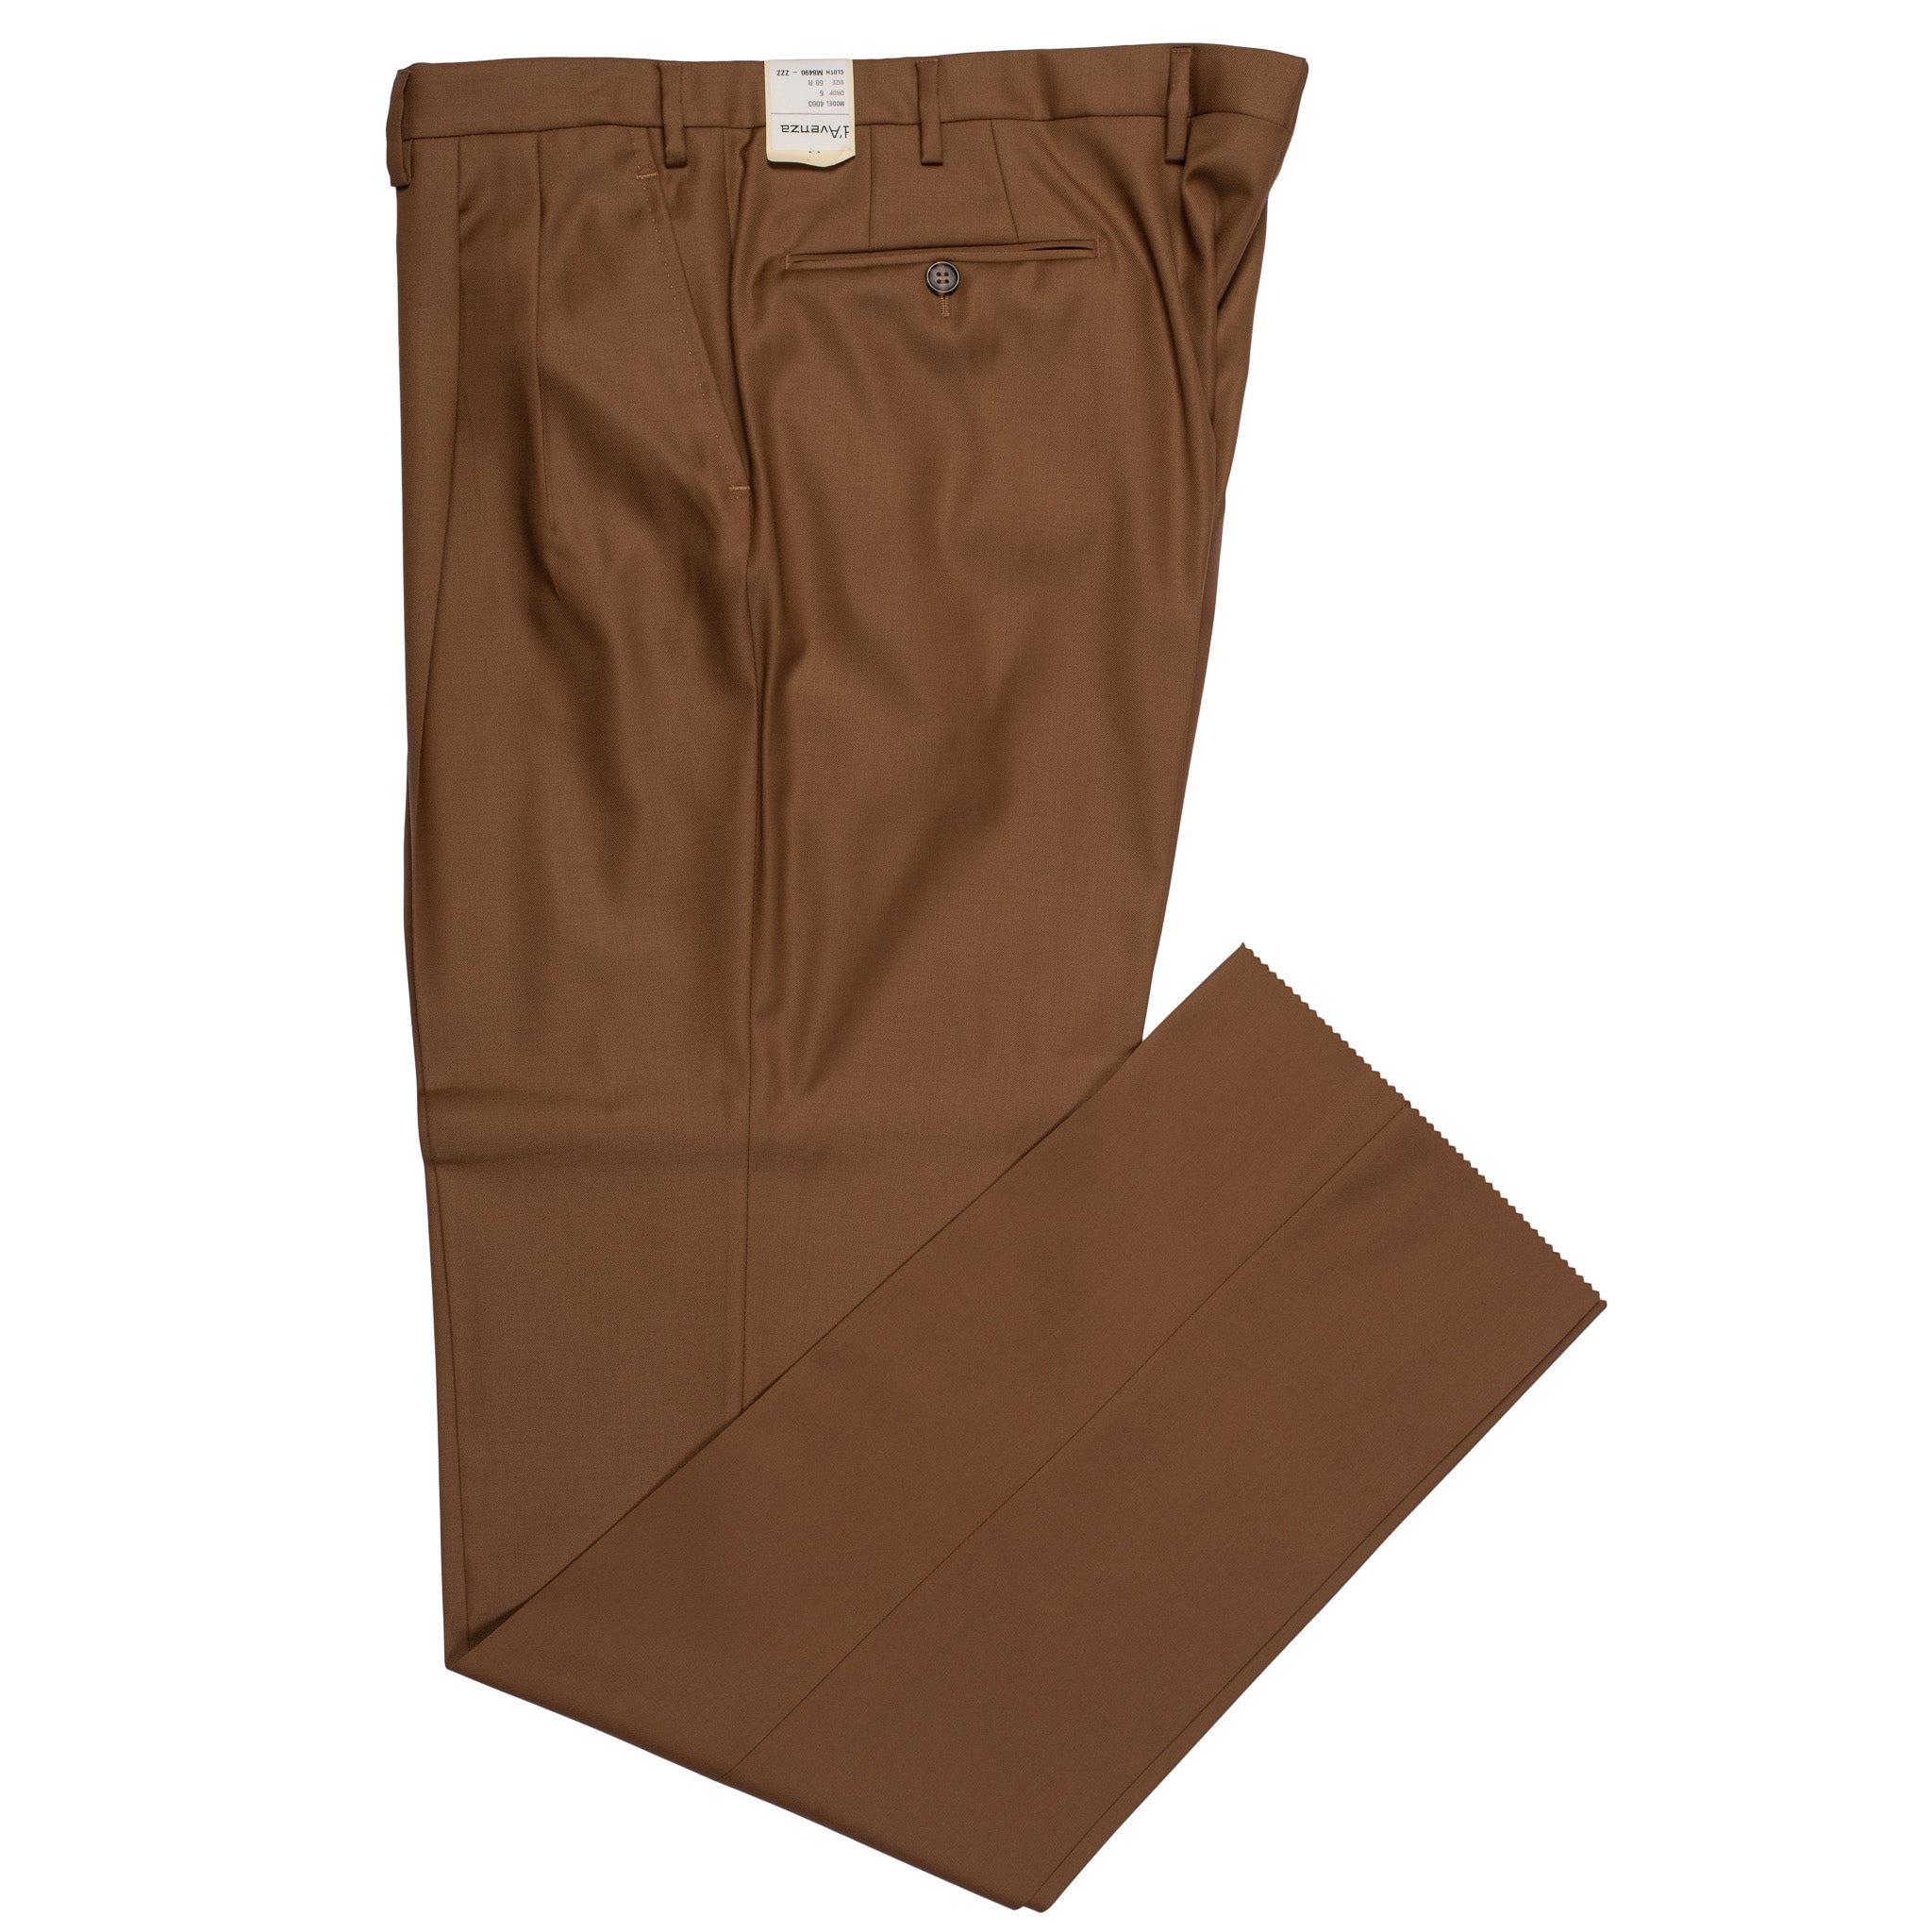 D'AVENZA Roma Brown Wool Twill DP Dress Pants NEW Classic Fit D'AVENZA